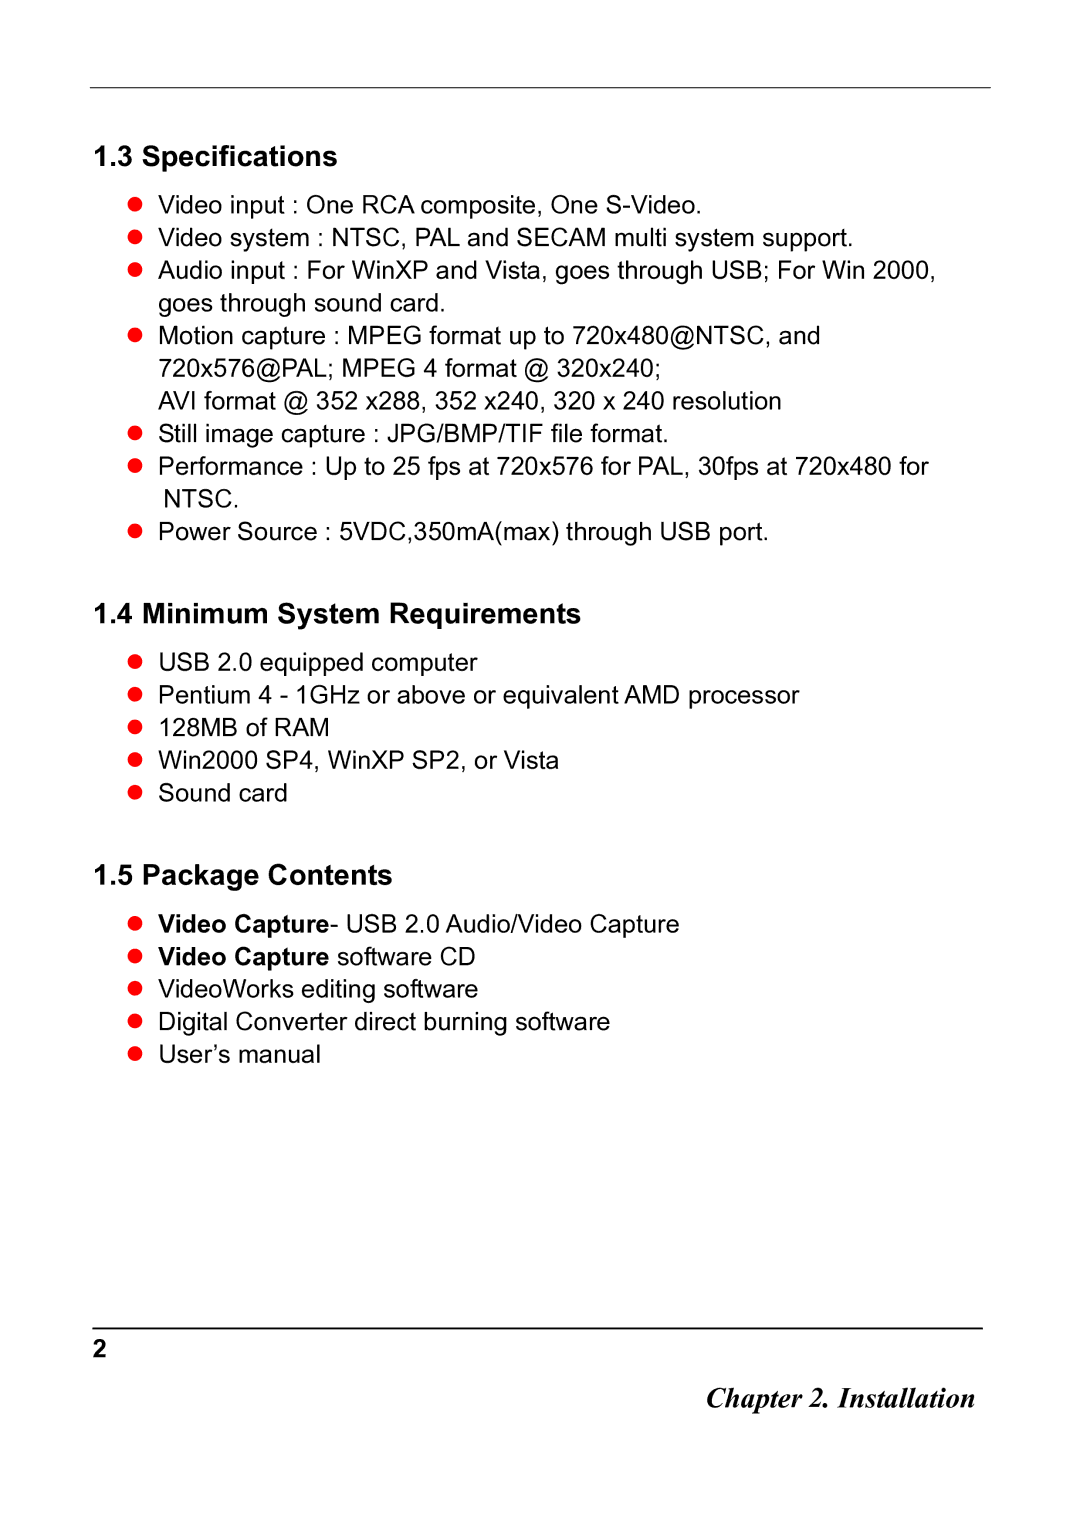 Quatech USB 2.0 user manual Specifications, Minimum System Requirements, Package Contents 